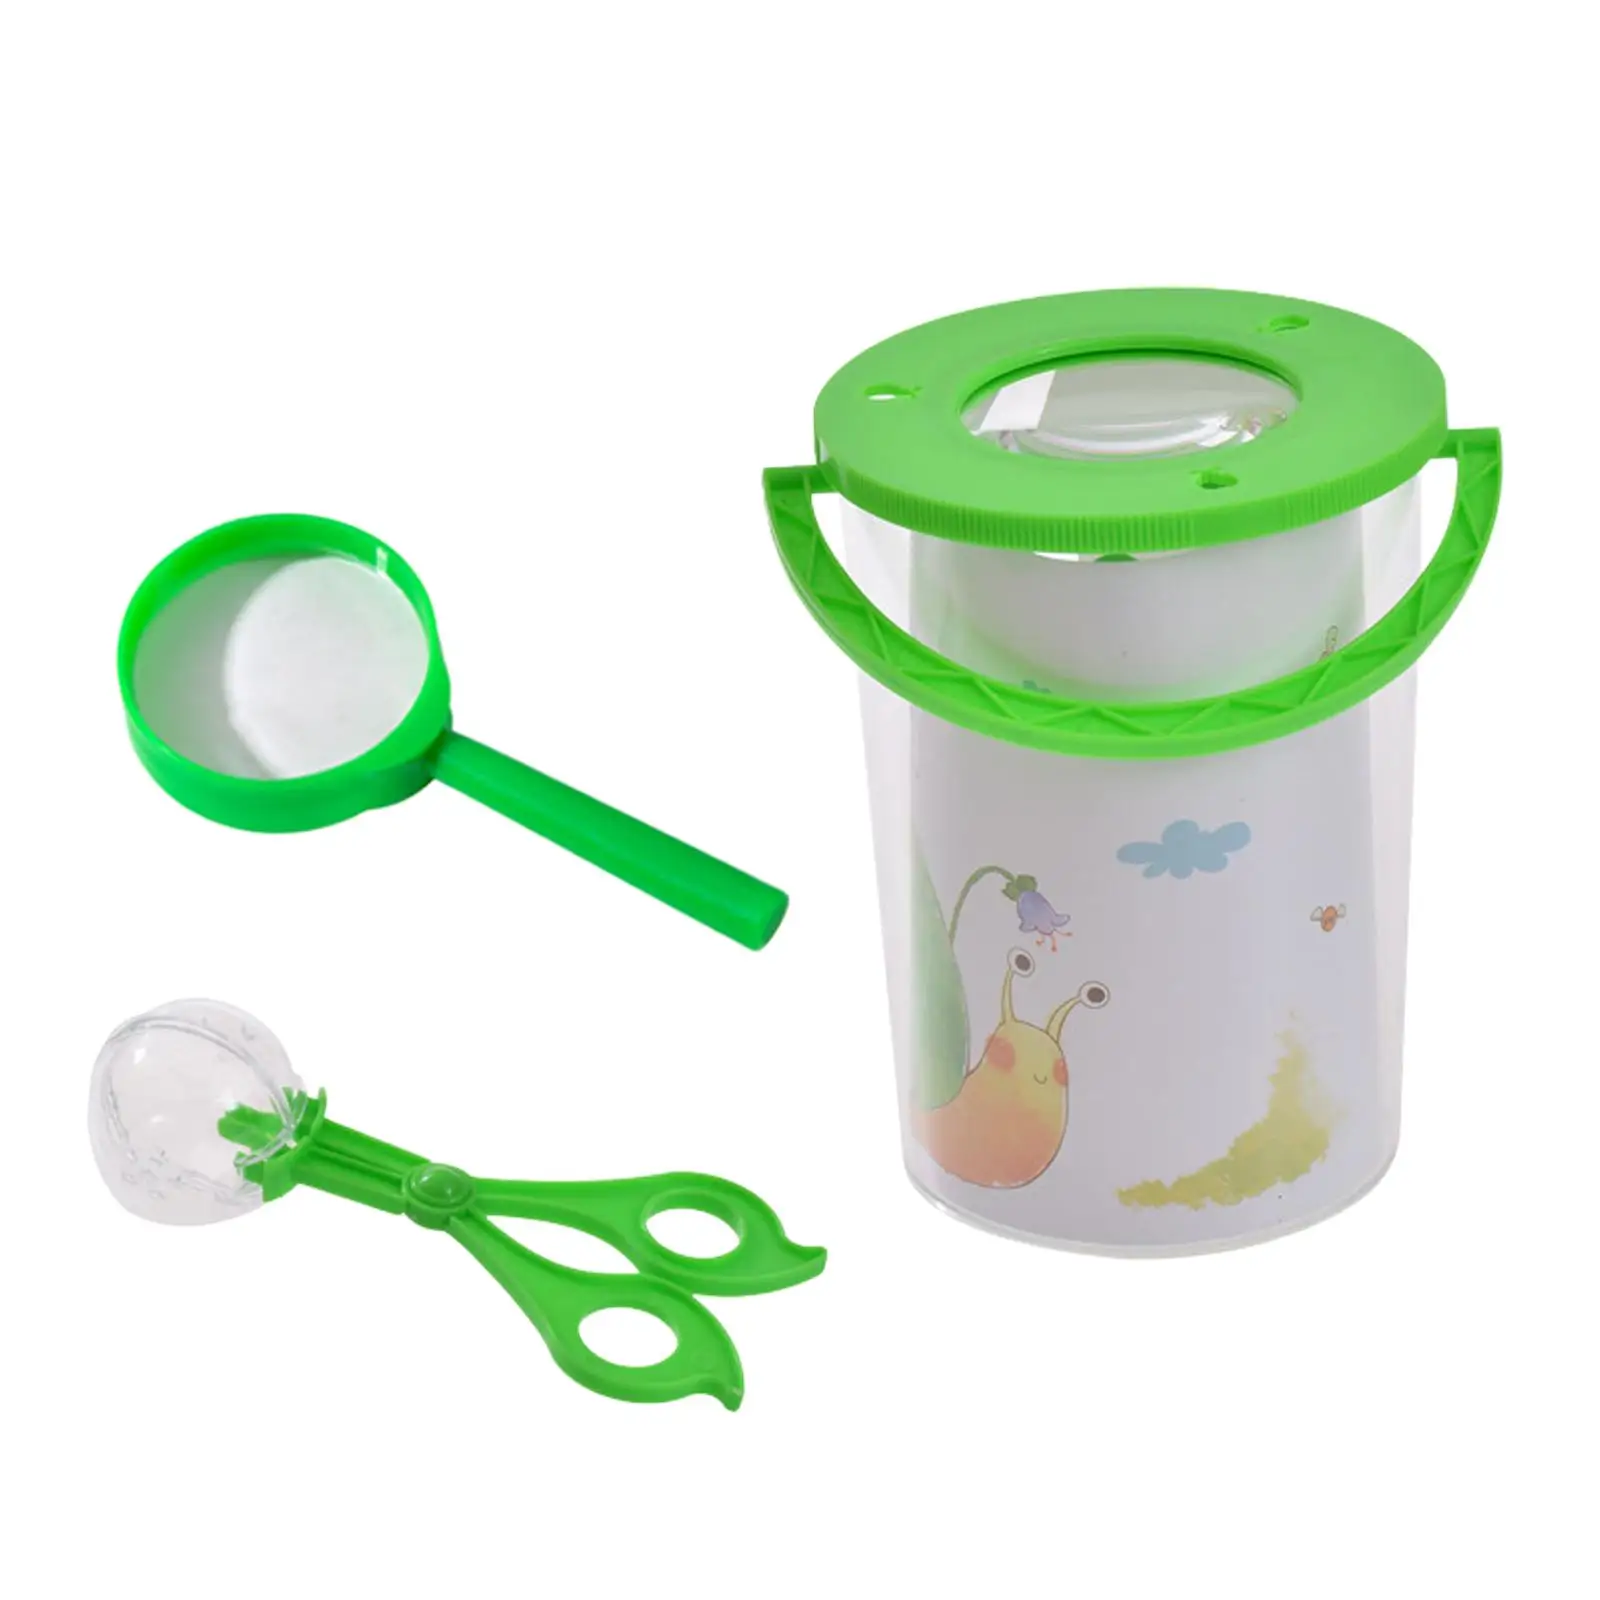 Insect Catcher Box Insect Viewer Insect Magnifier Container Magnifying Insect Box for Children Adventure 4 5 6 7 8